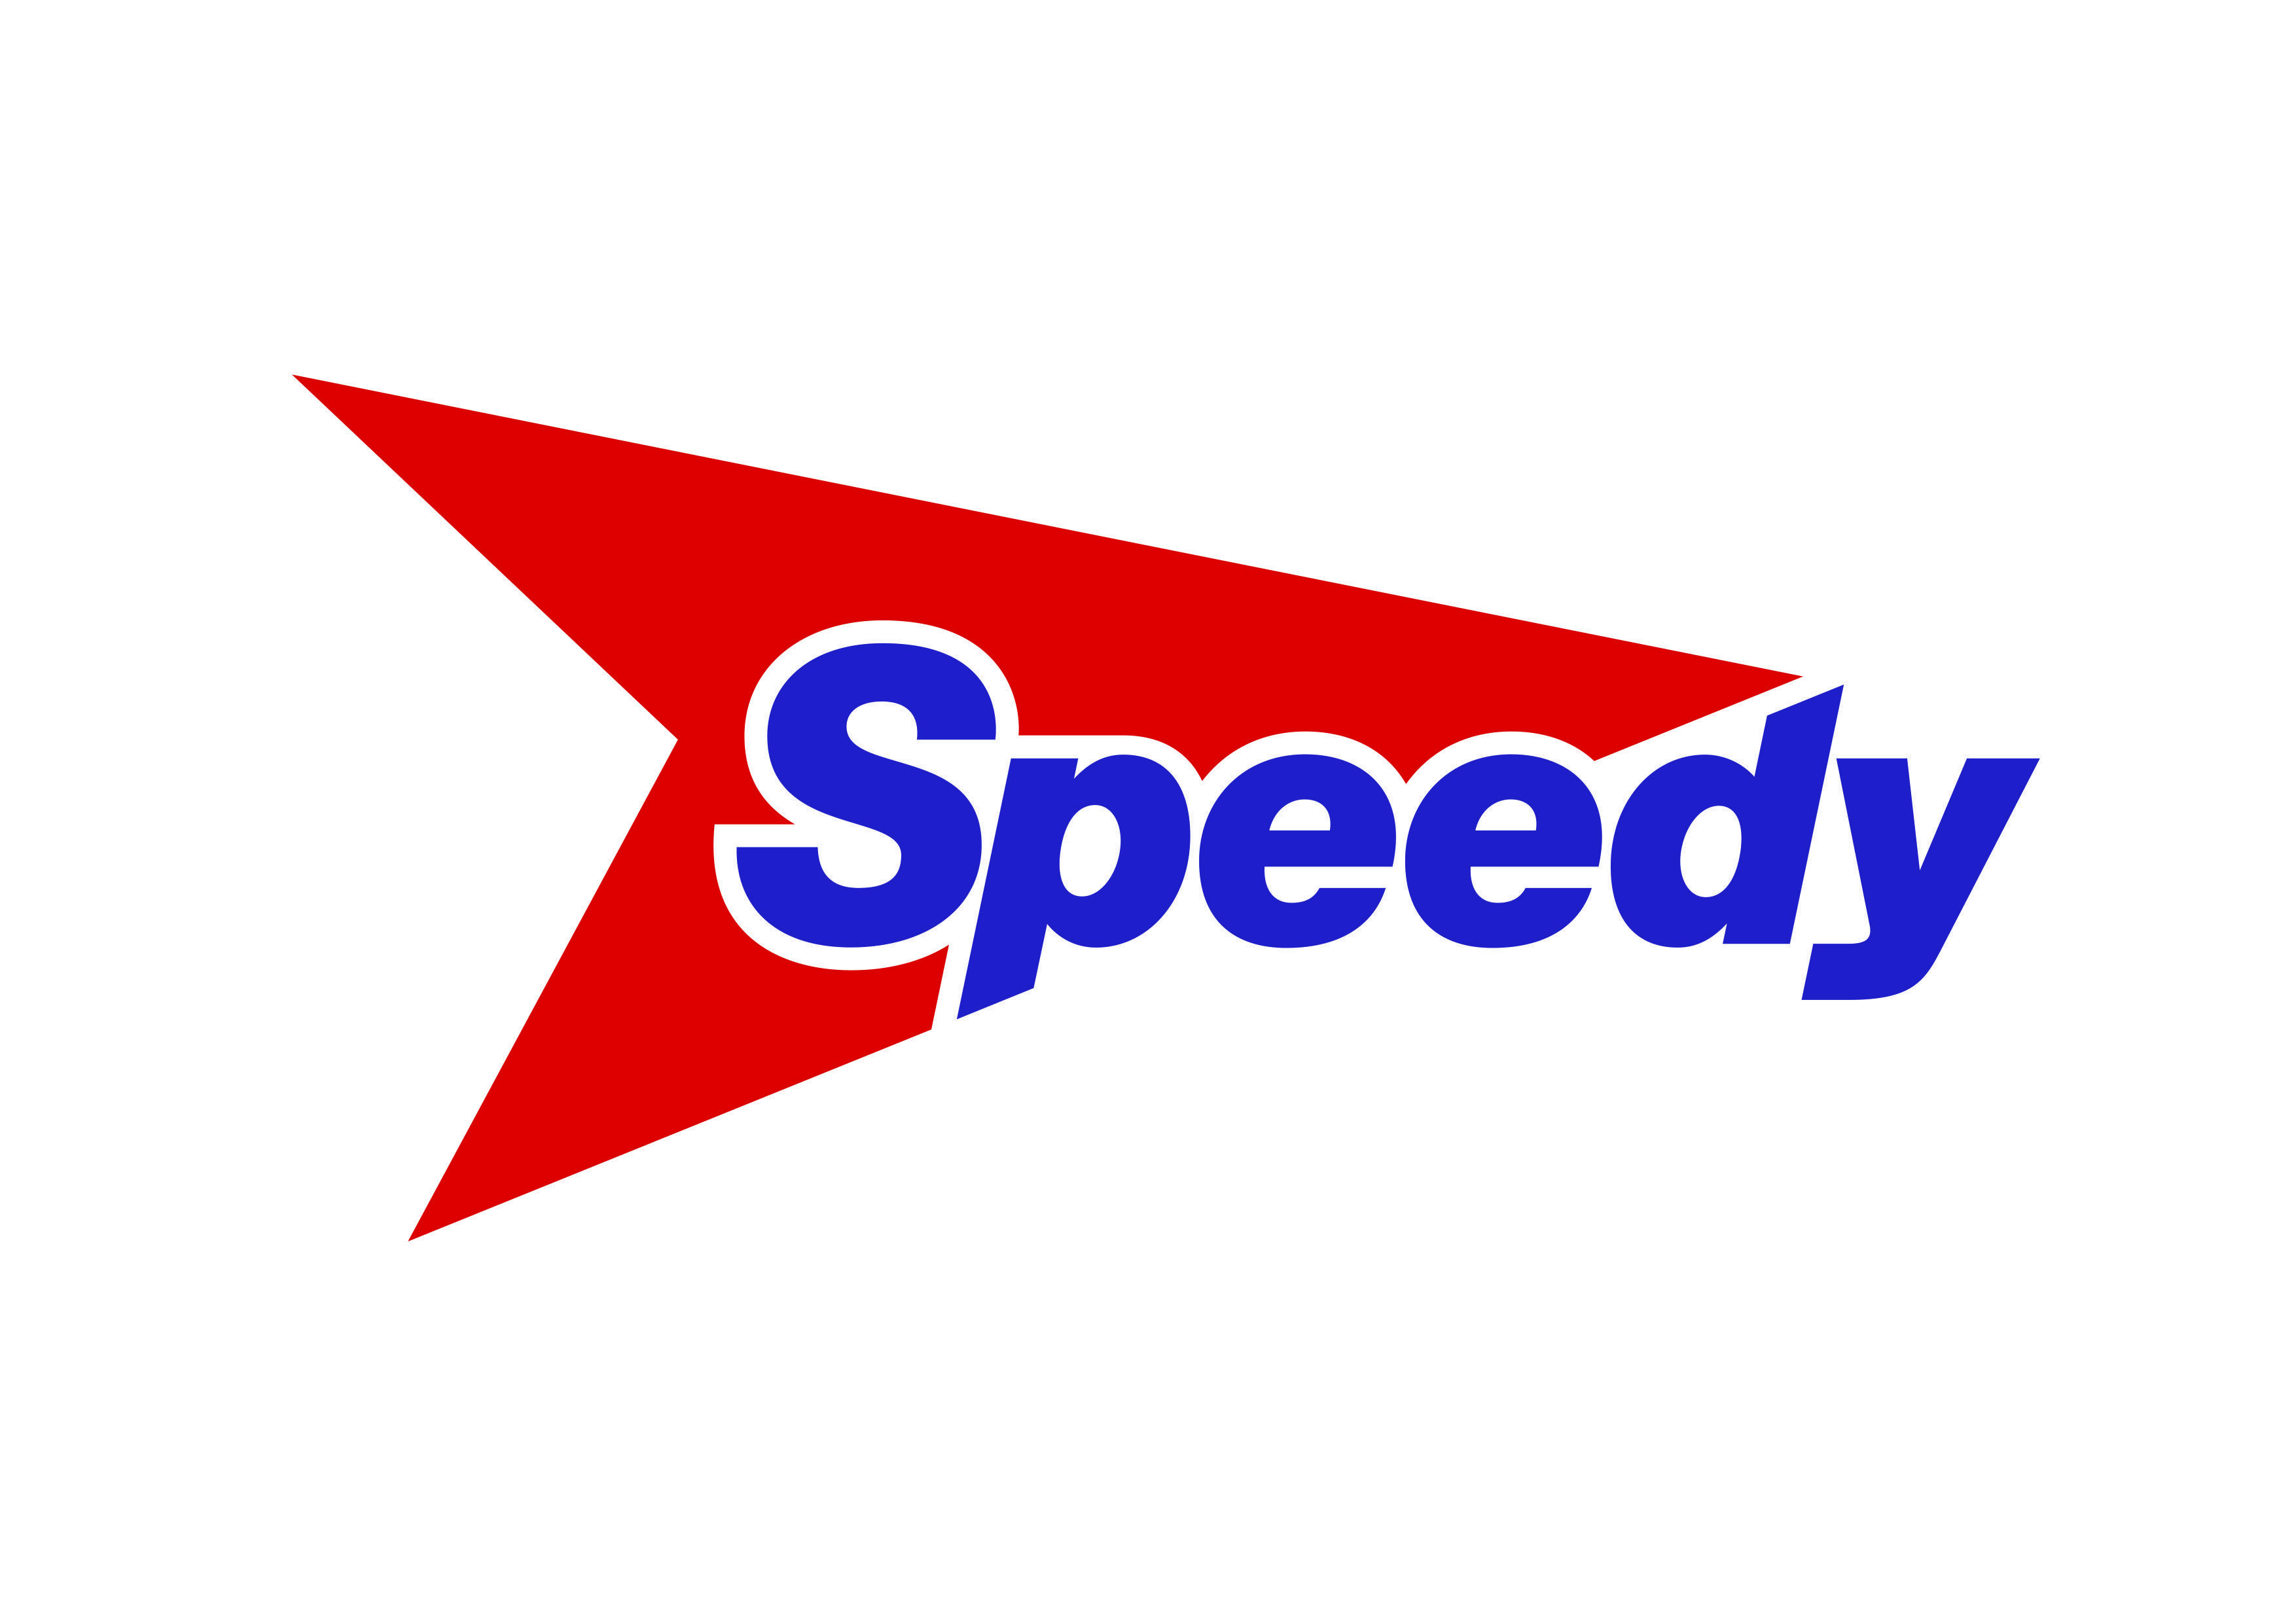 Red and Blue Services Logo - Speedy Asset Services Ltd